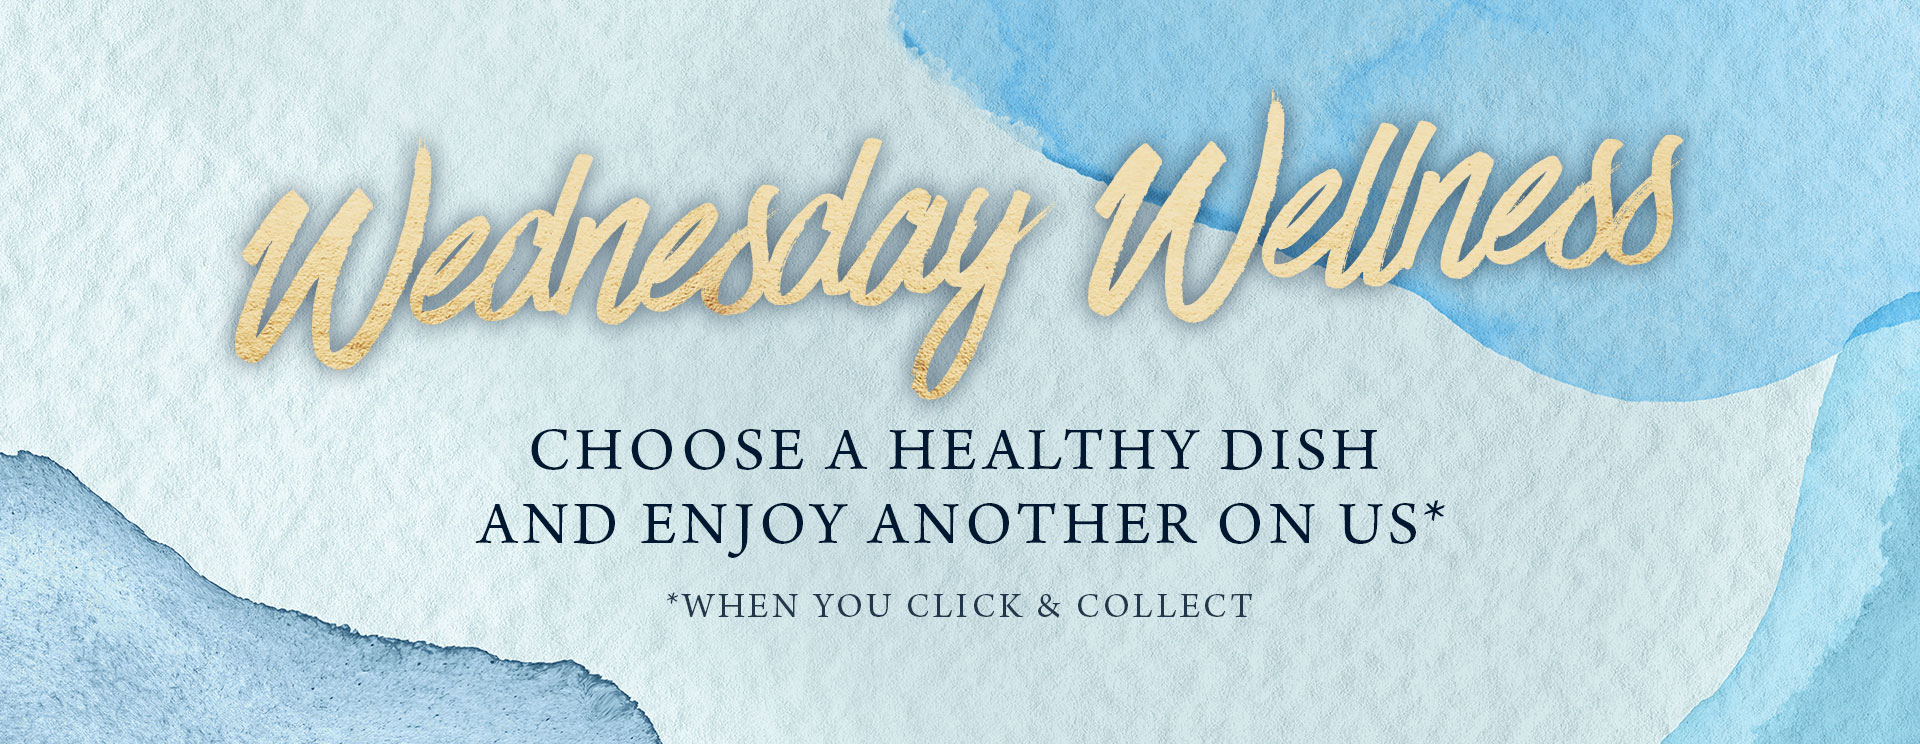 Wednesday Wellness at The Oatlands Chaser